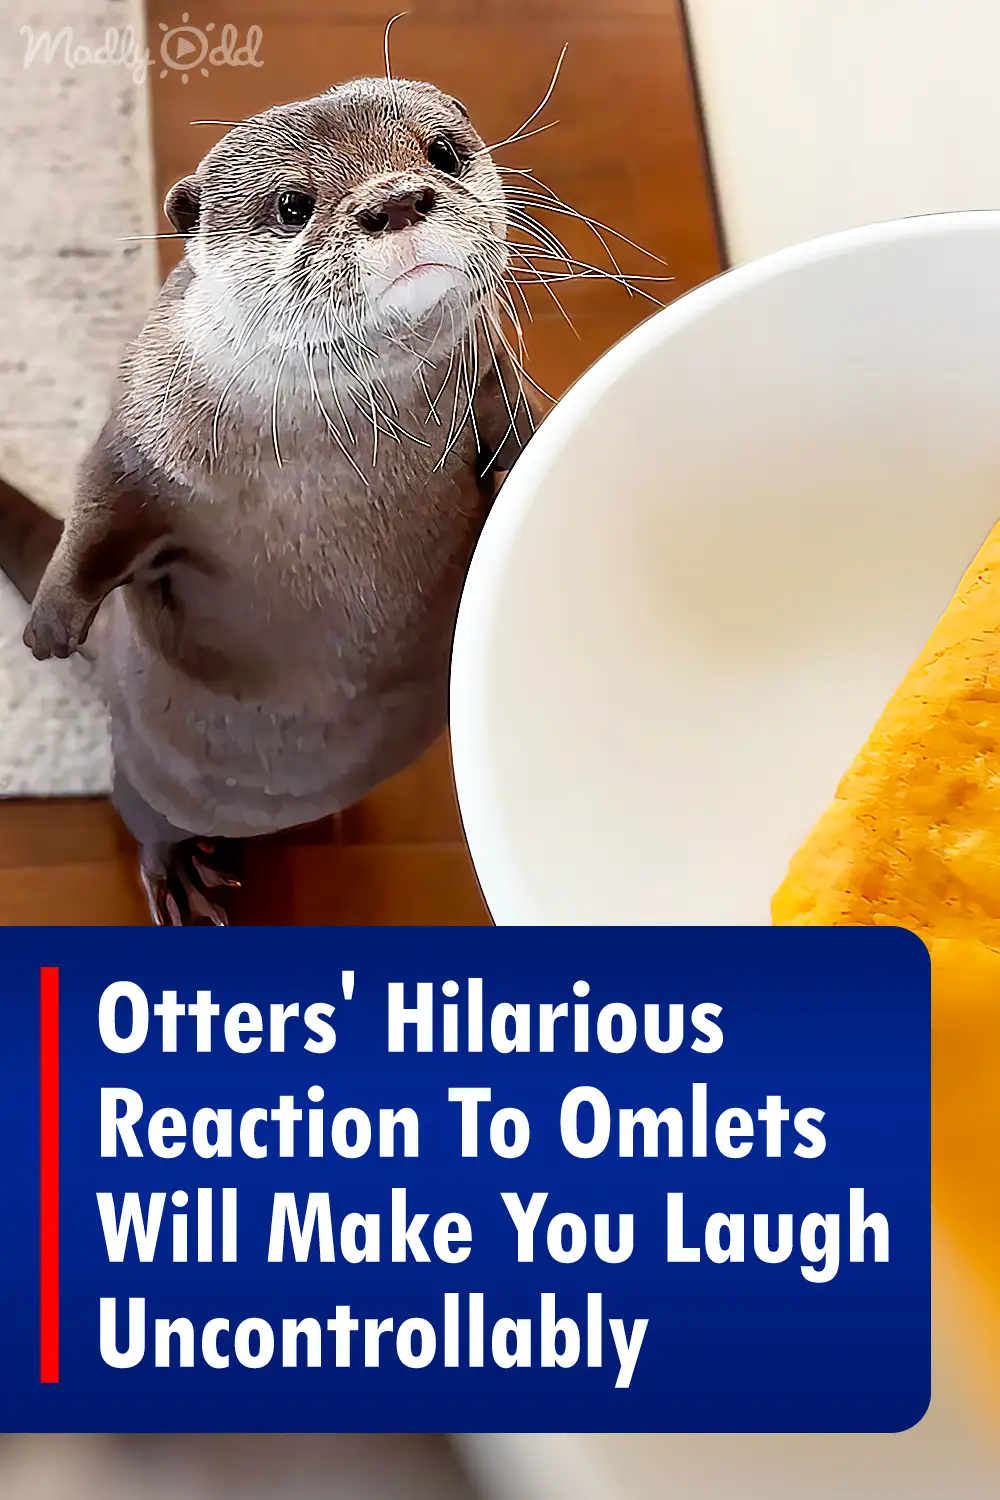 Otters\' Hilarious Reaction To Omlets Will Make You Laugh Uncontrollably